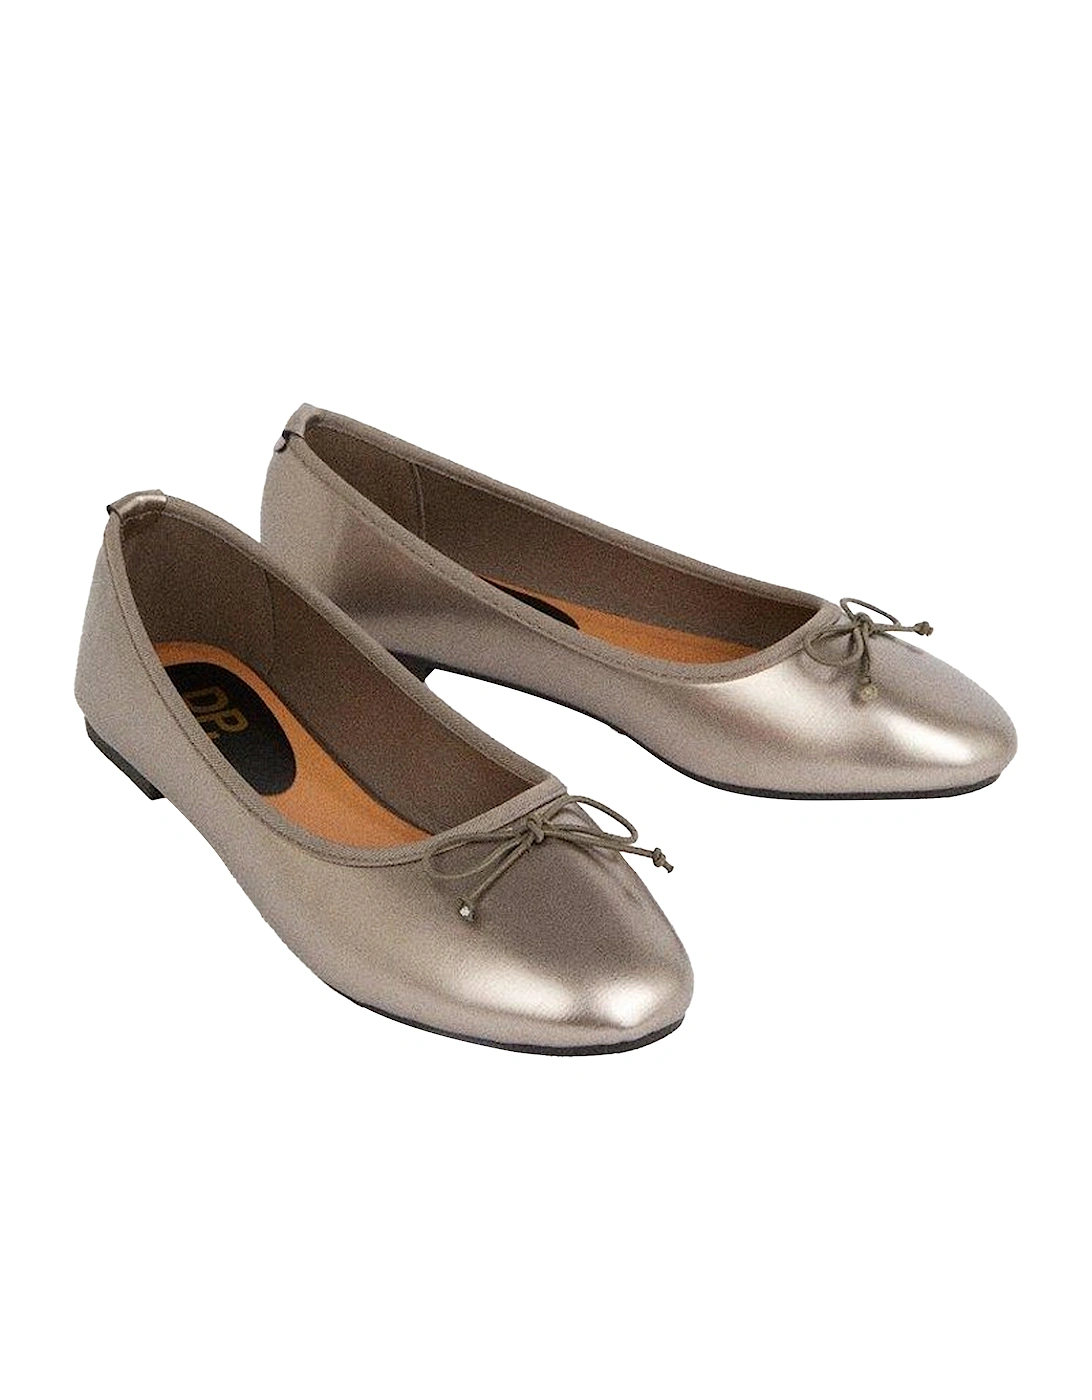 Womens/Ladies Phoebe Bow Flat Ballet Shoes